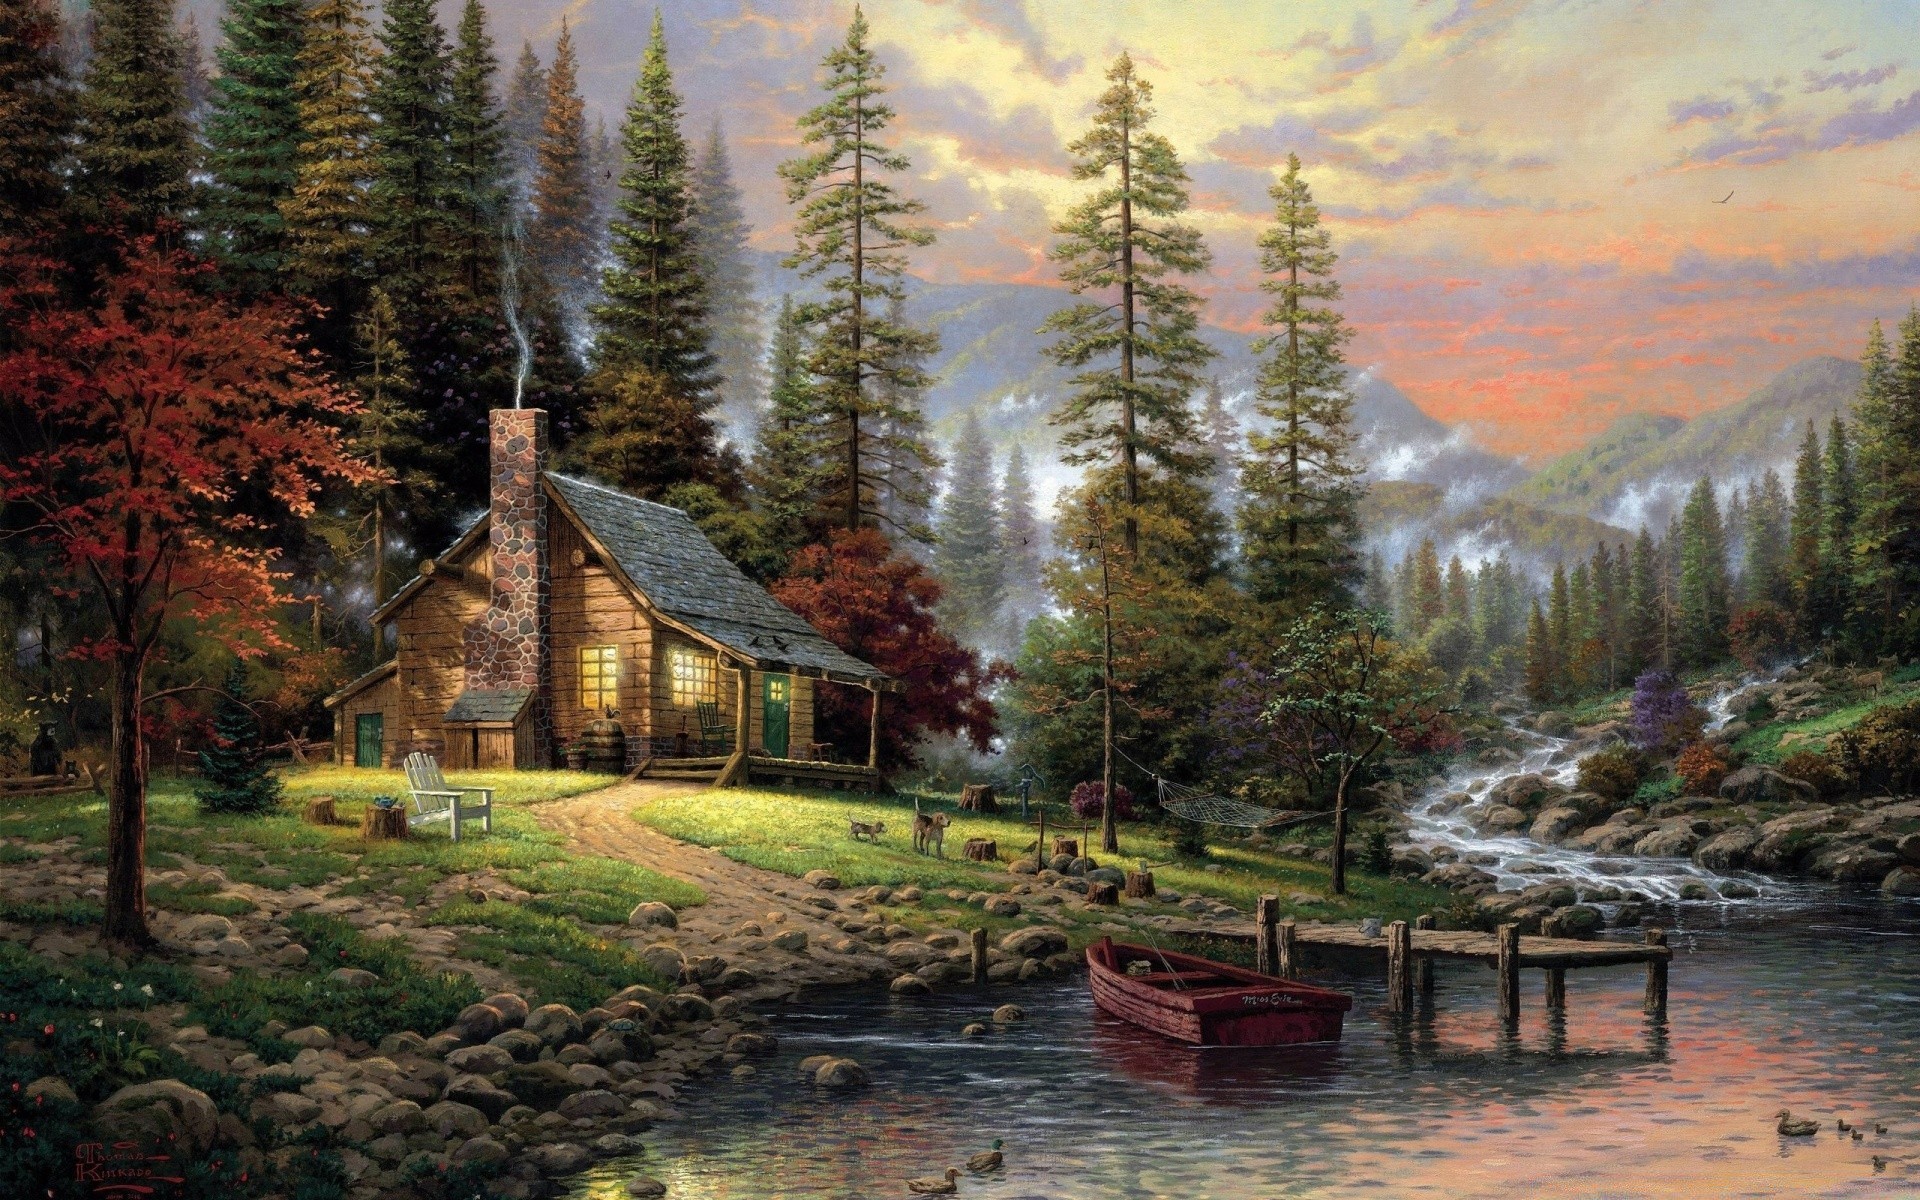 drawings wood lake nature mountain water tree landscape fall outdoors travel scenic snow house park reflection